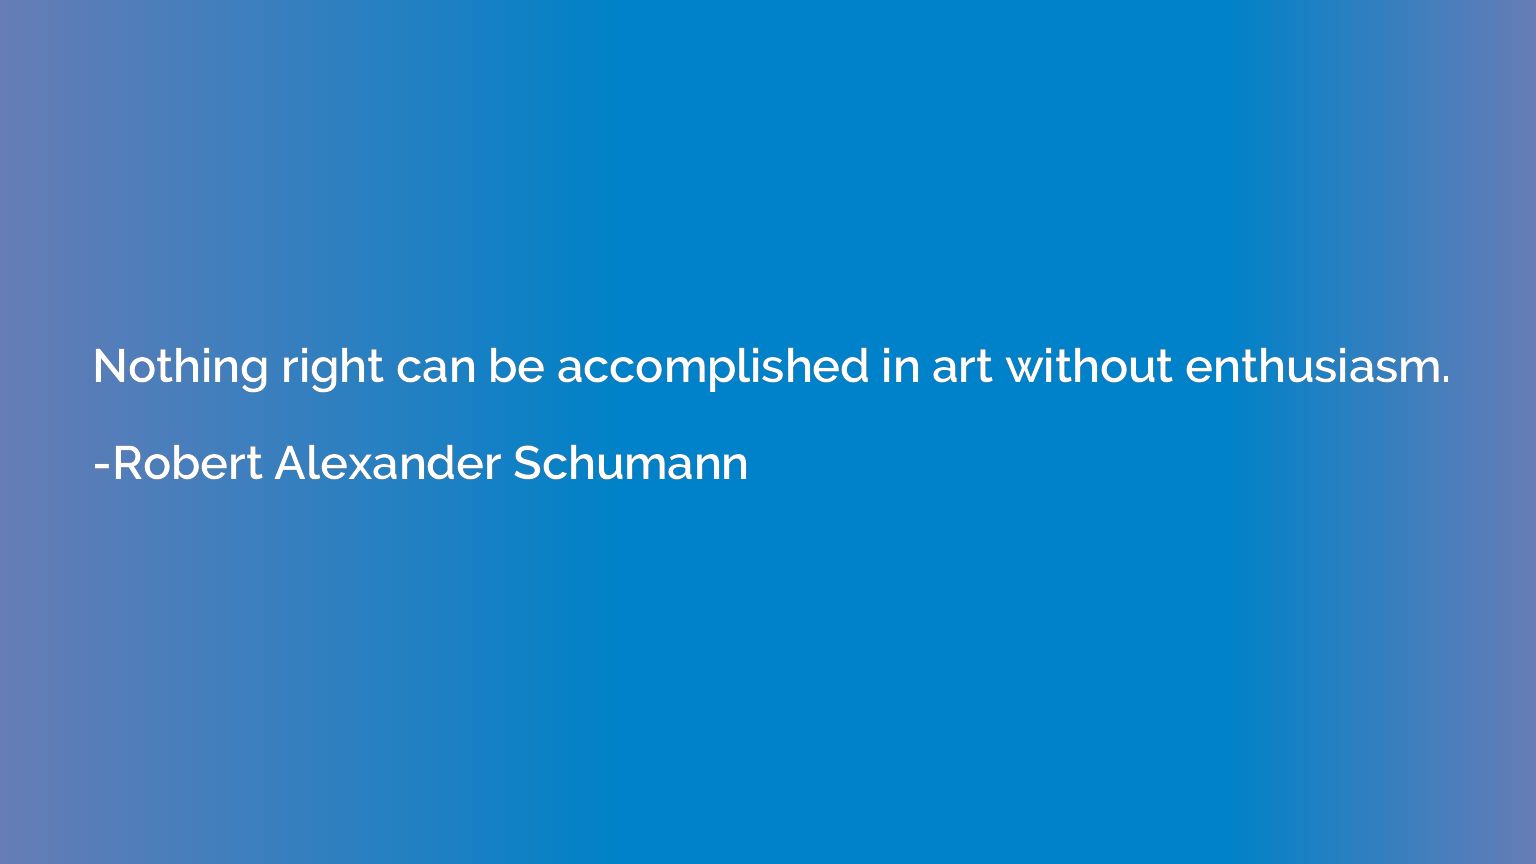 Nothing right can be accomplished in art without enthusiasm.